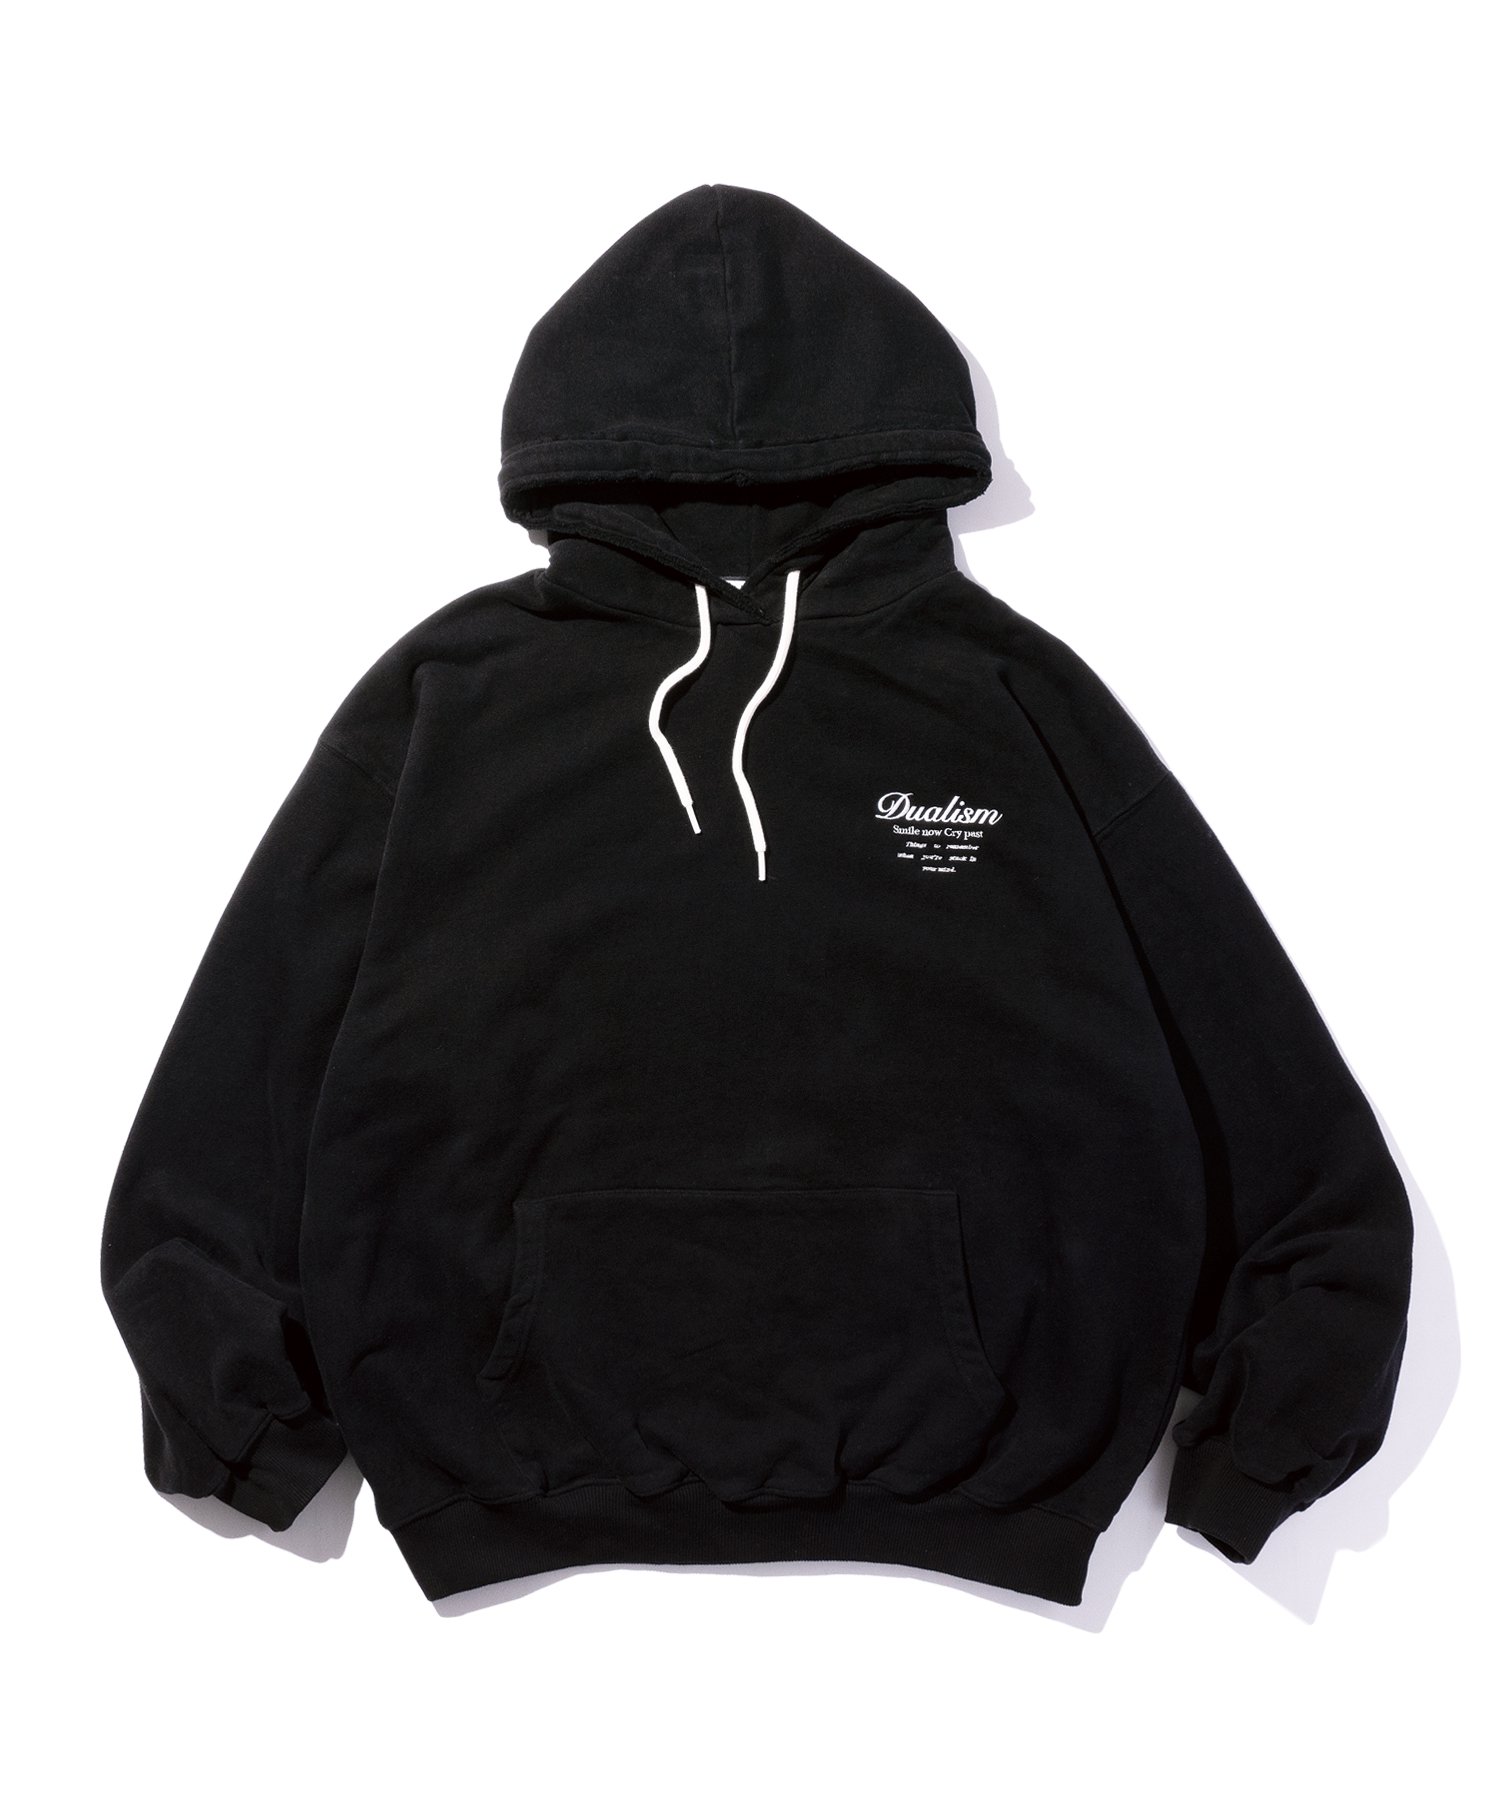 DUALISM/DLSM(デュアリズム) セットアップ SMILE NOW COMBO HOODIE ...